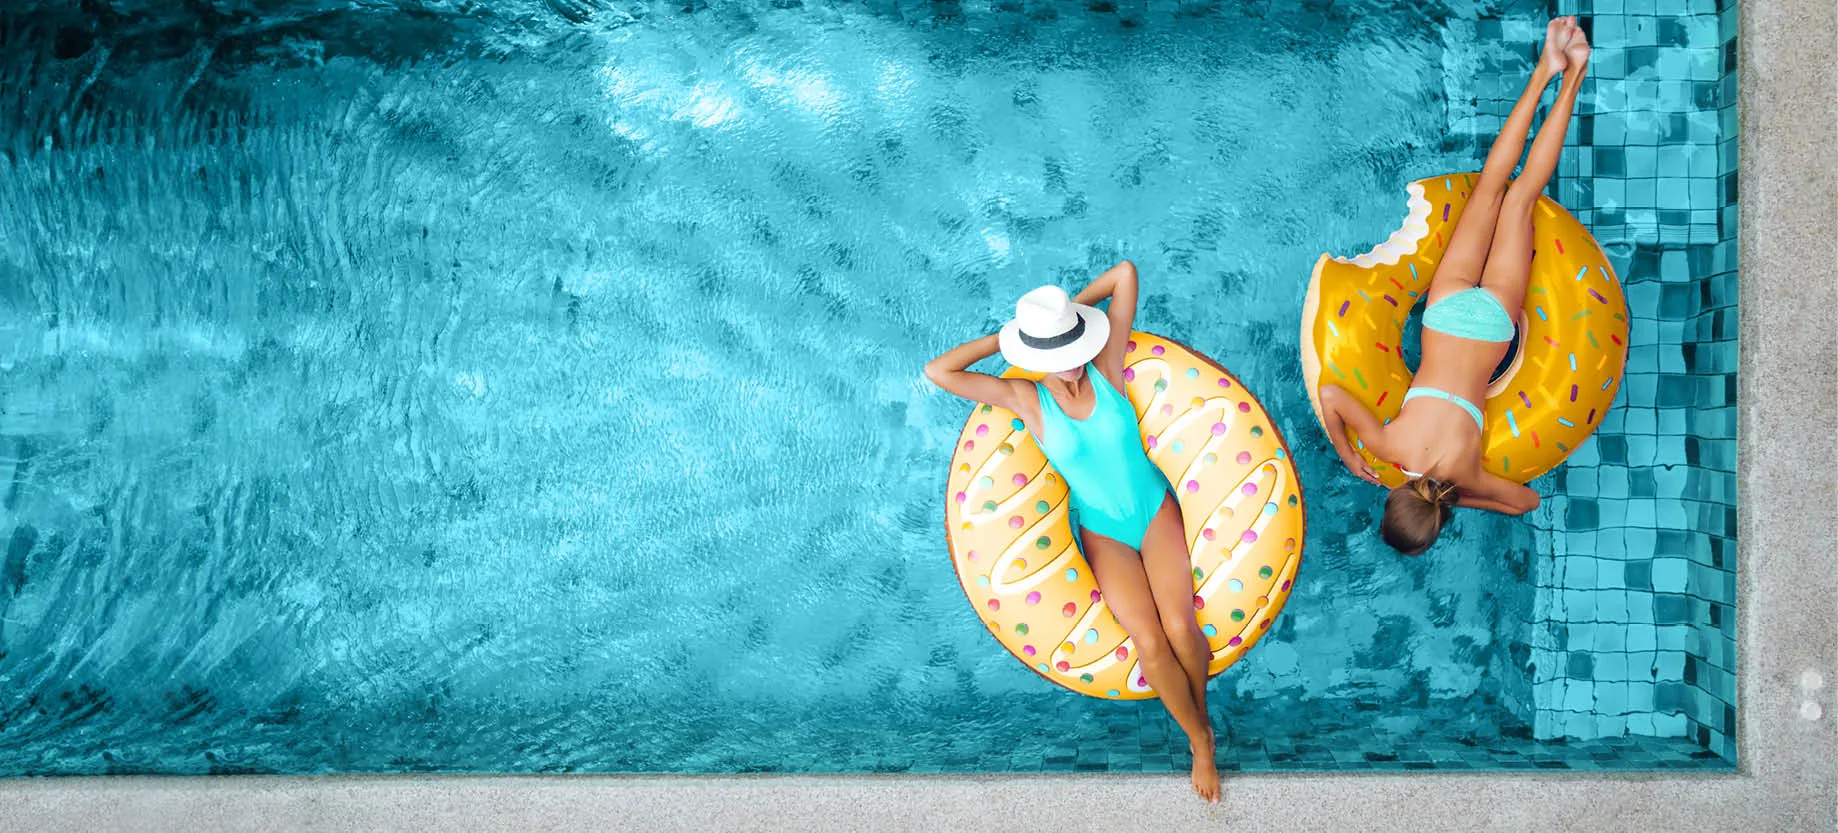 Relax in style with inflatable pool floats and loungers